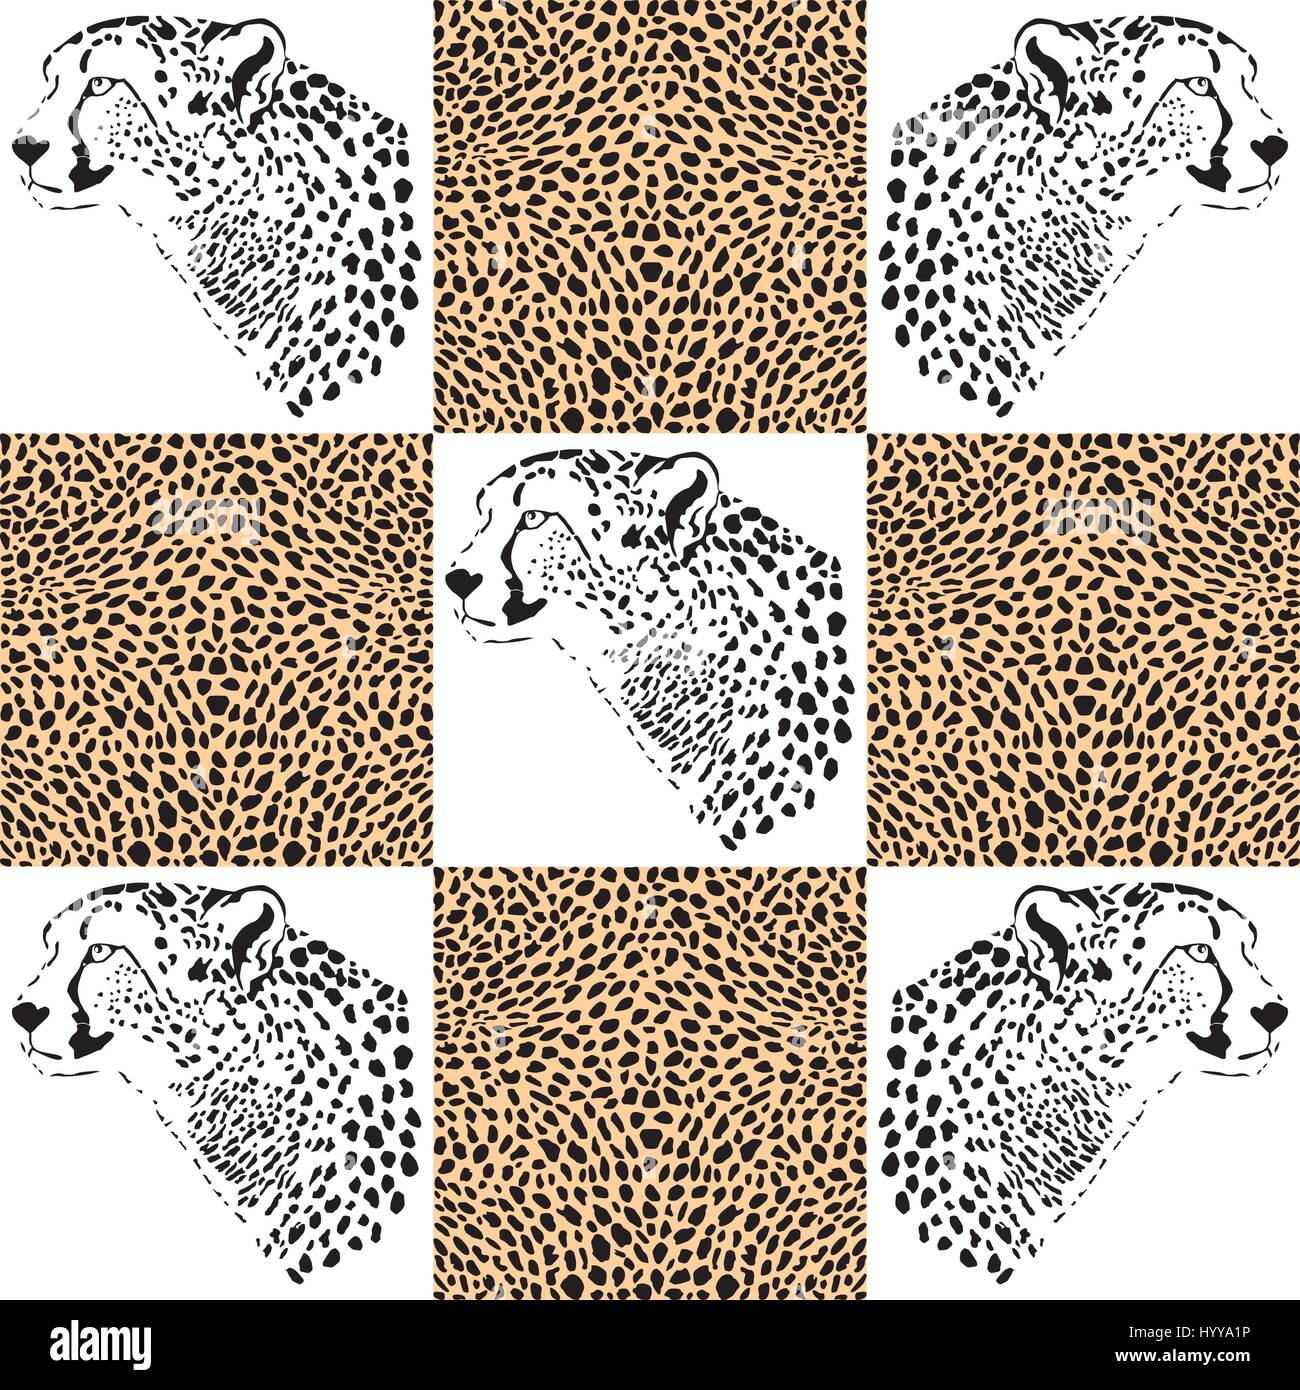 Cheetah patterns for textiles Stock Vector